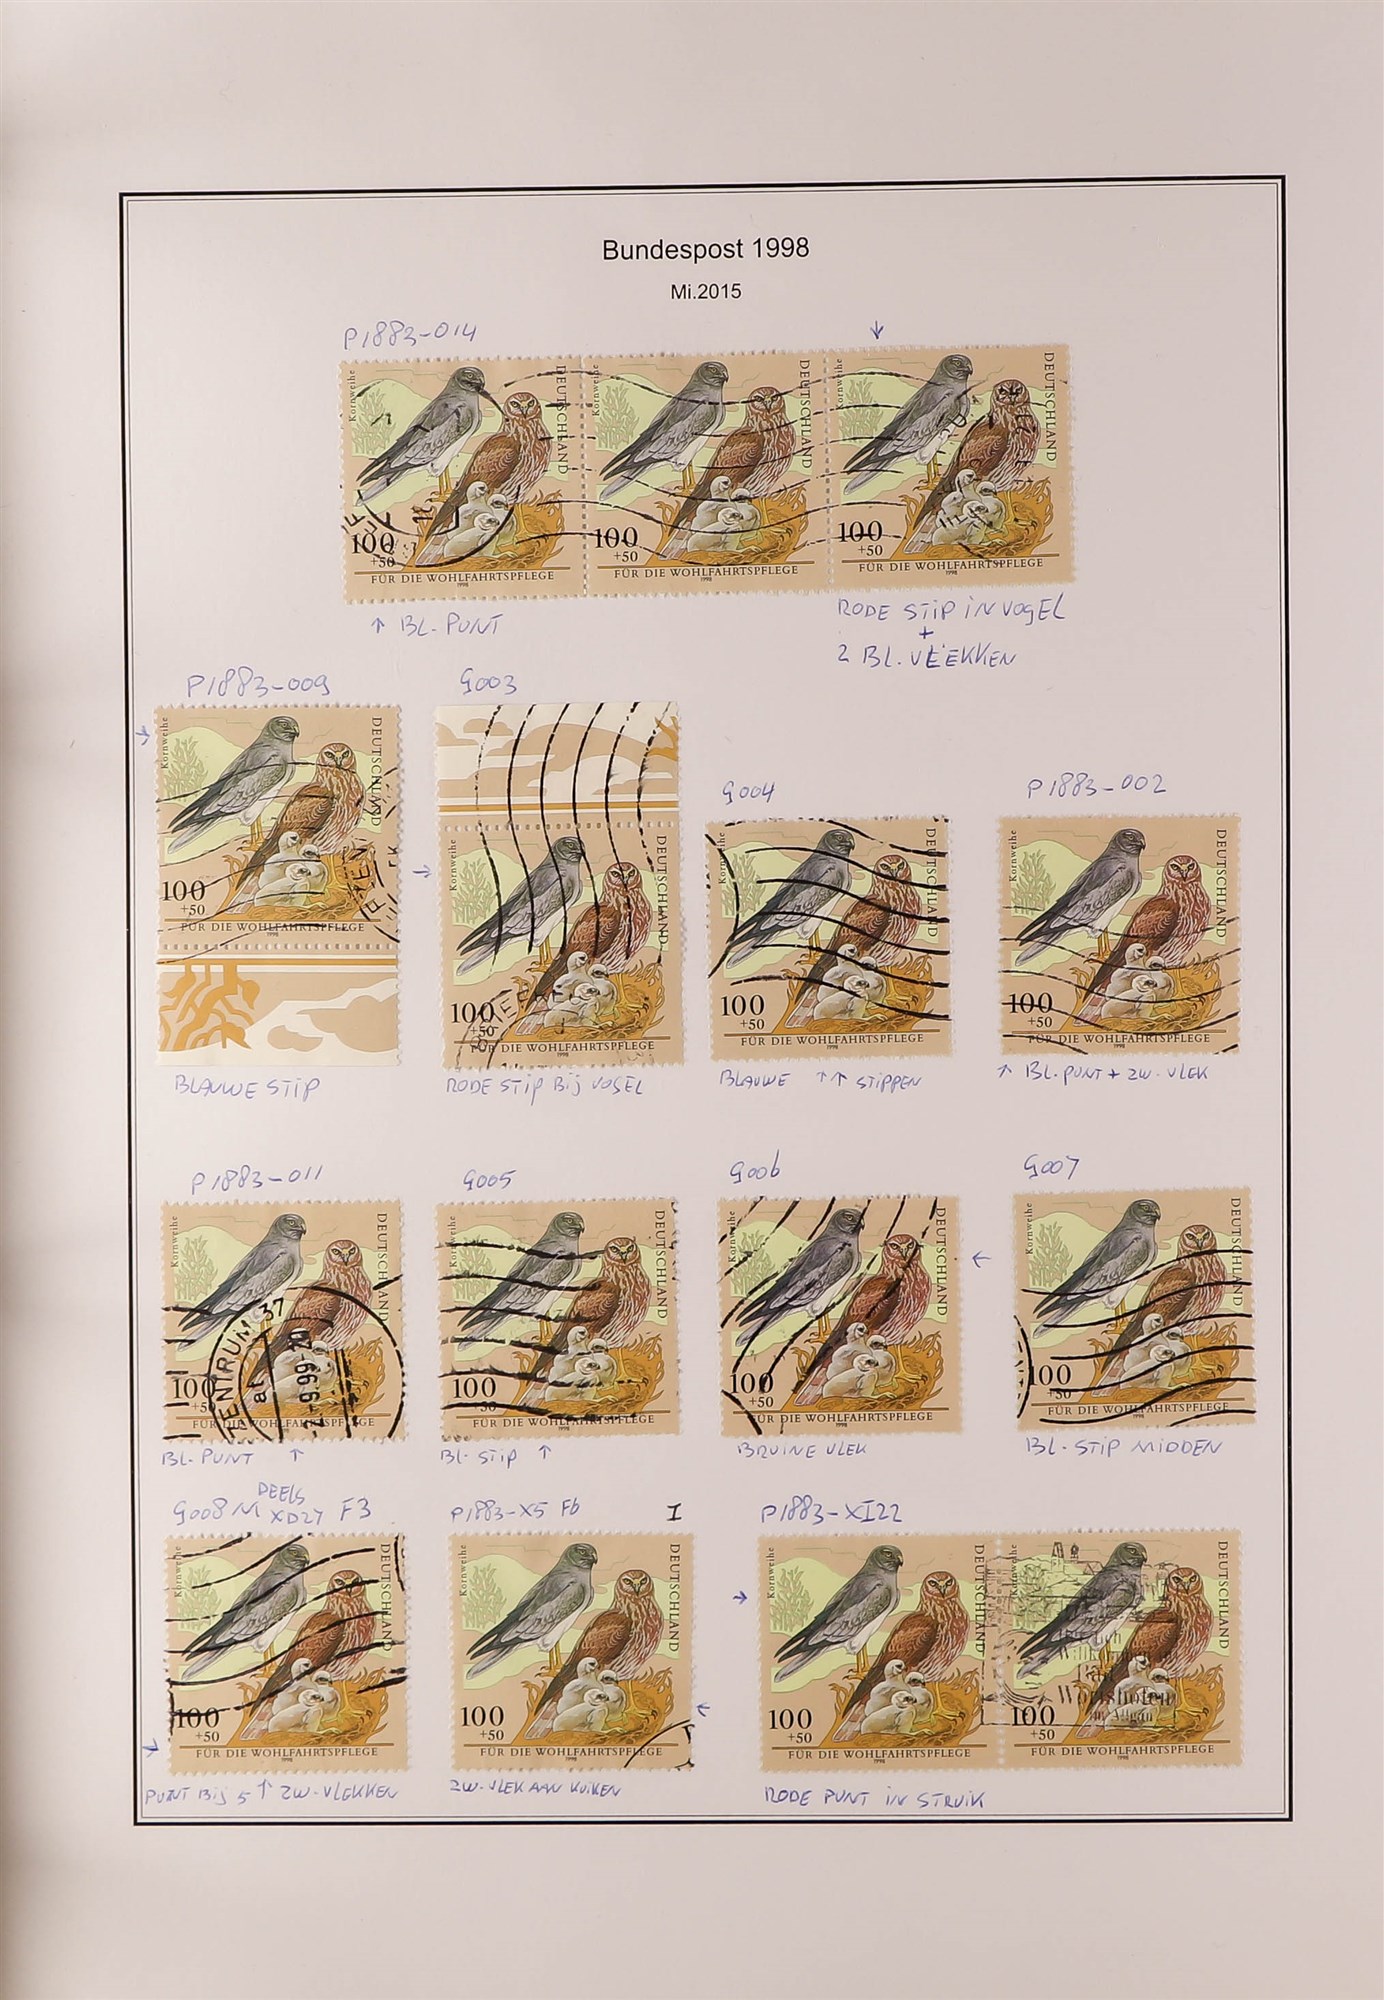 GERMANY WEST 1996 - 1999 SPECIALIZED COLLECTION of over 2000 mint, never hinged mint and used - Image 18 of 35